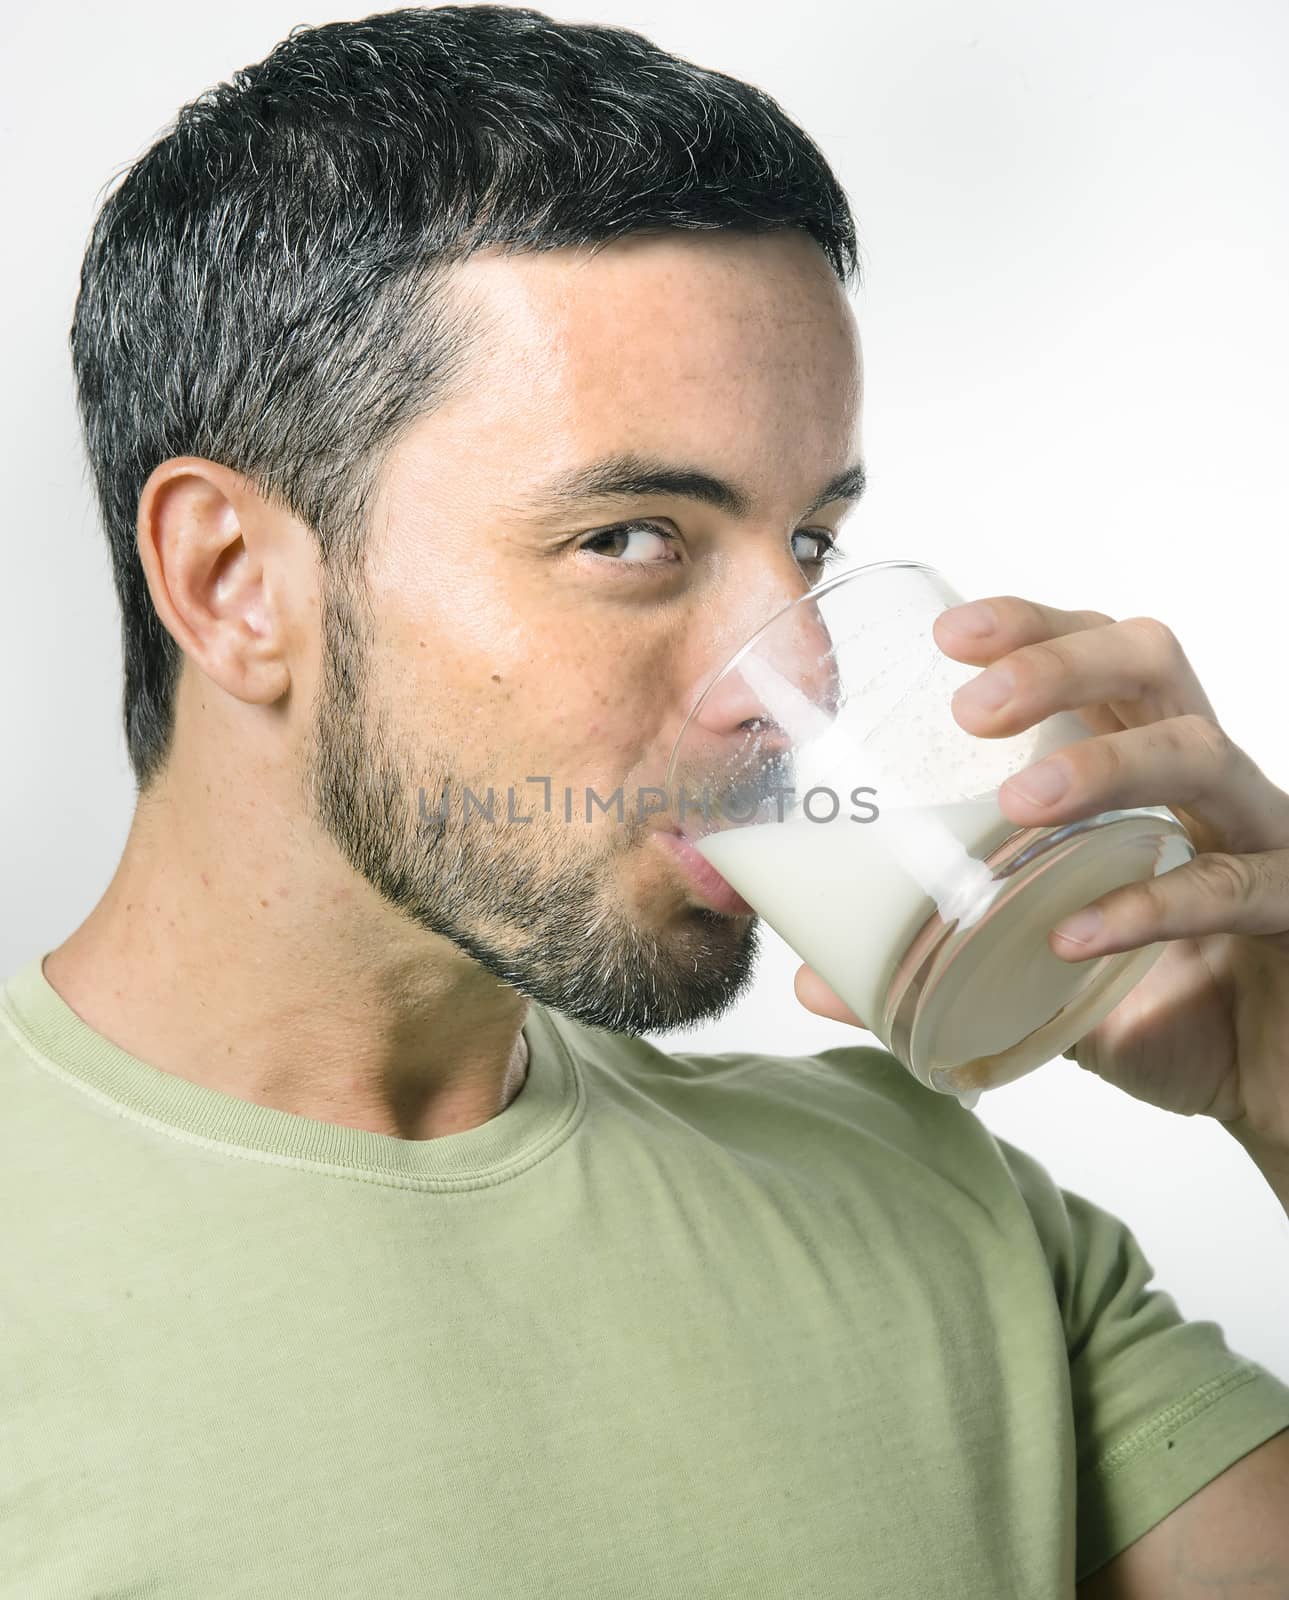 Healthy Young Handsome Man with Beard drinking Milk isolated on White Background